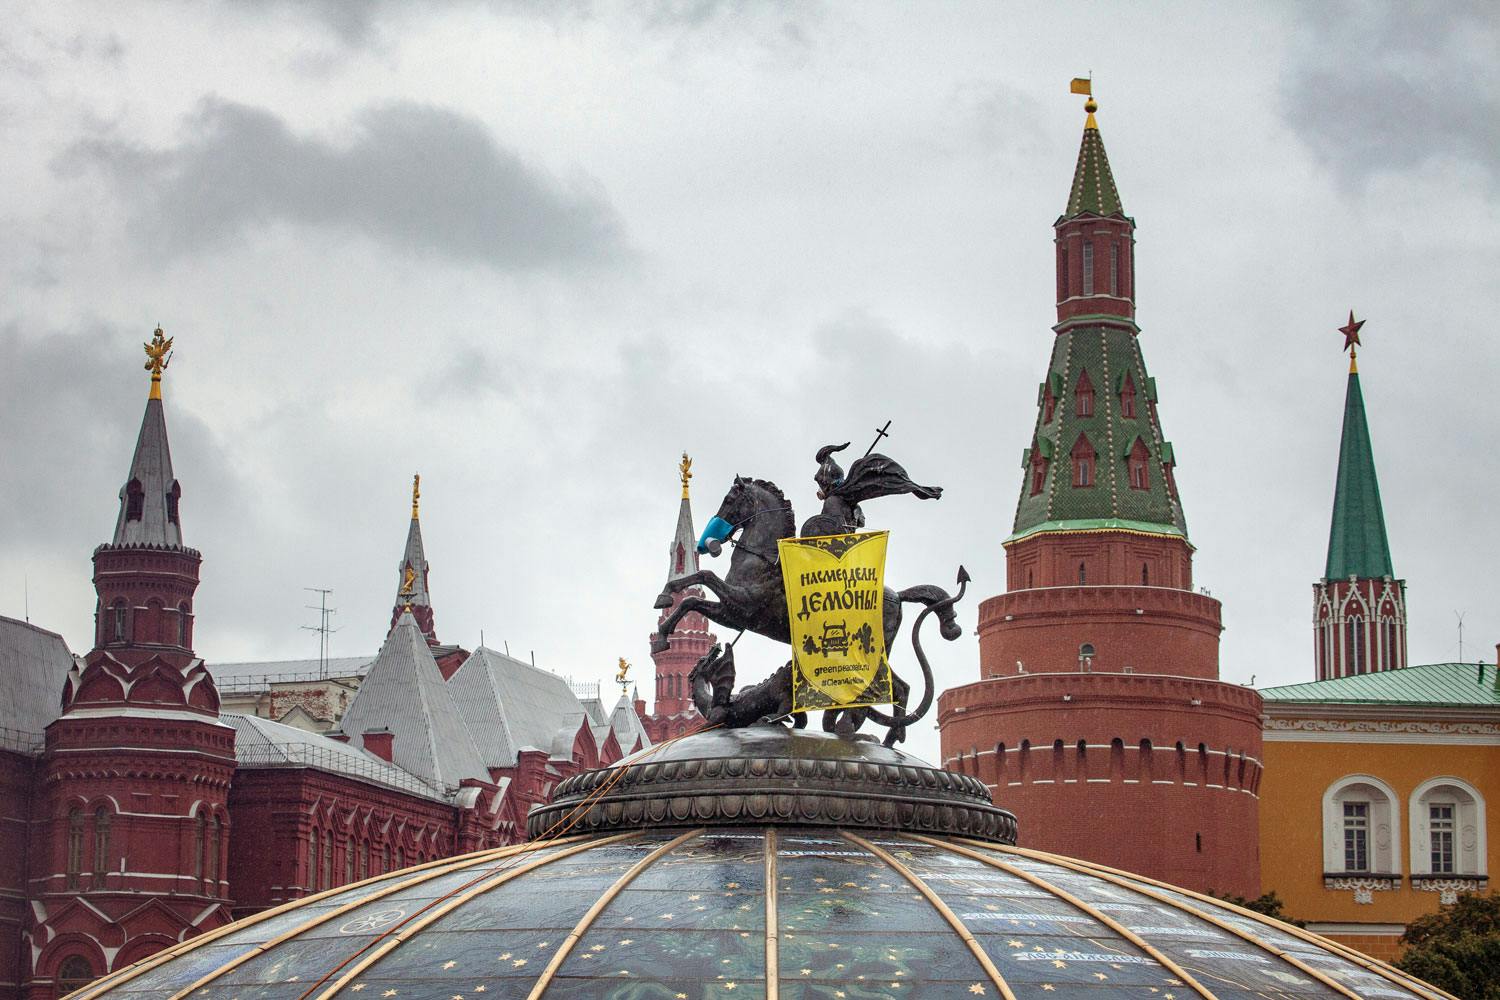 The statue of St. George atop his horse, near the Kremlin. They both wear respirators, put there by Greenpeace activists.